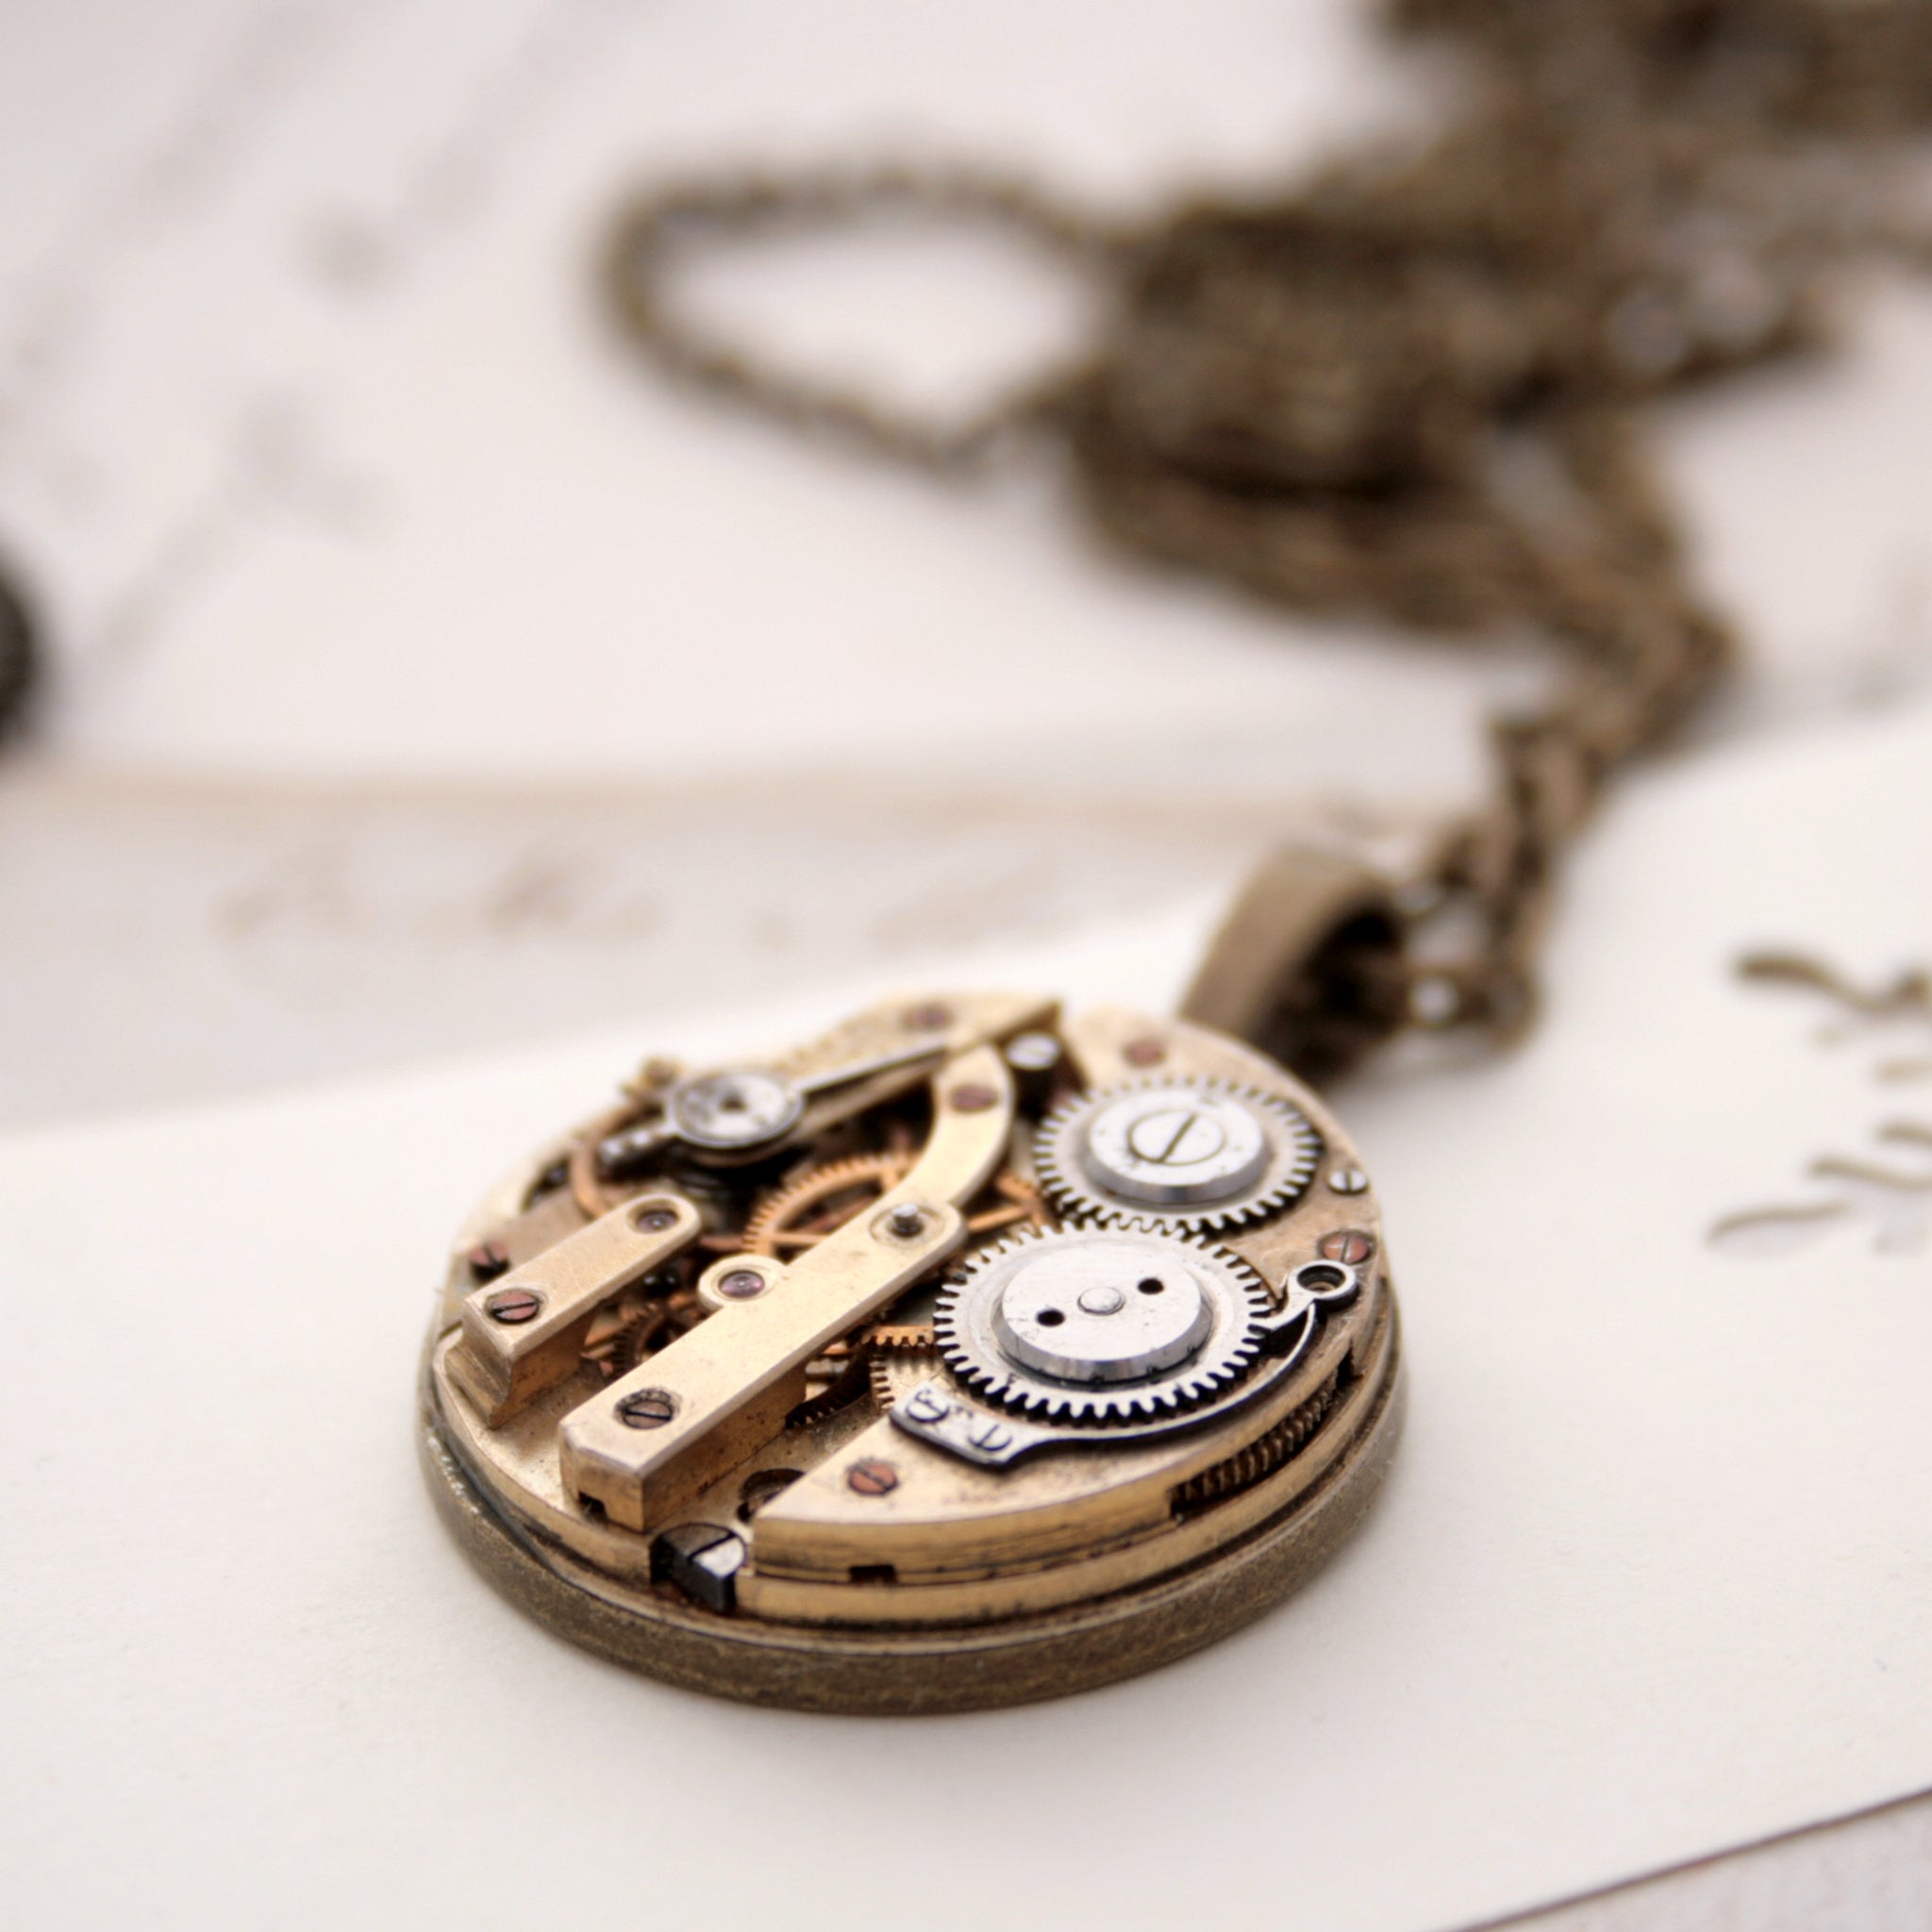 Unique Pendant Necklace with Watch Mechanism in Steampunk Style